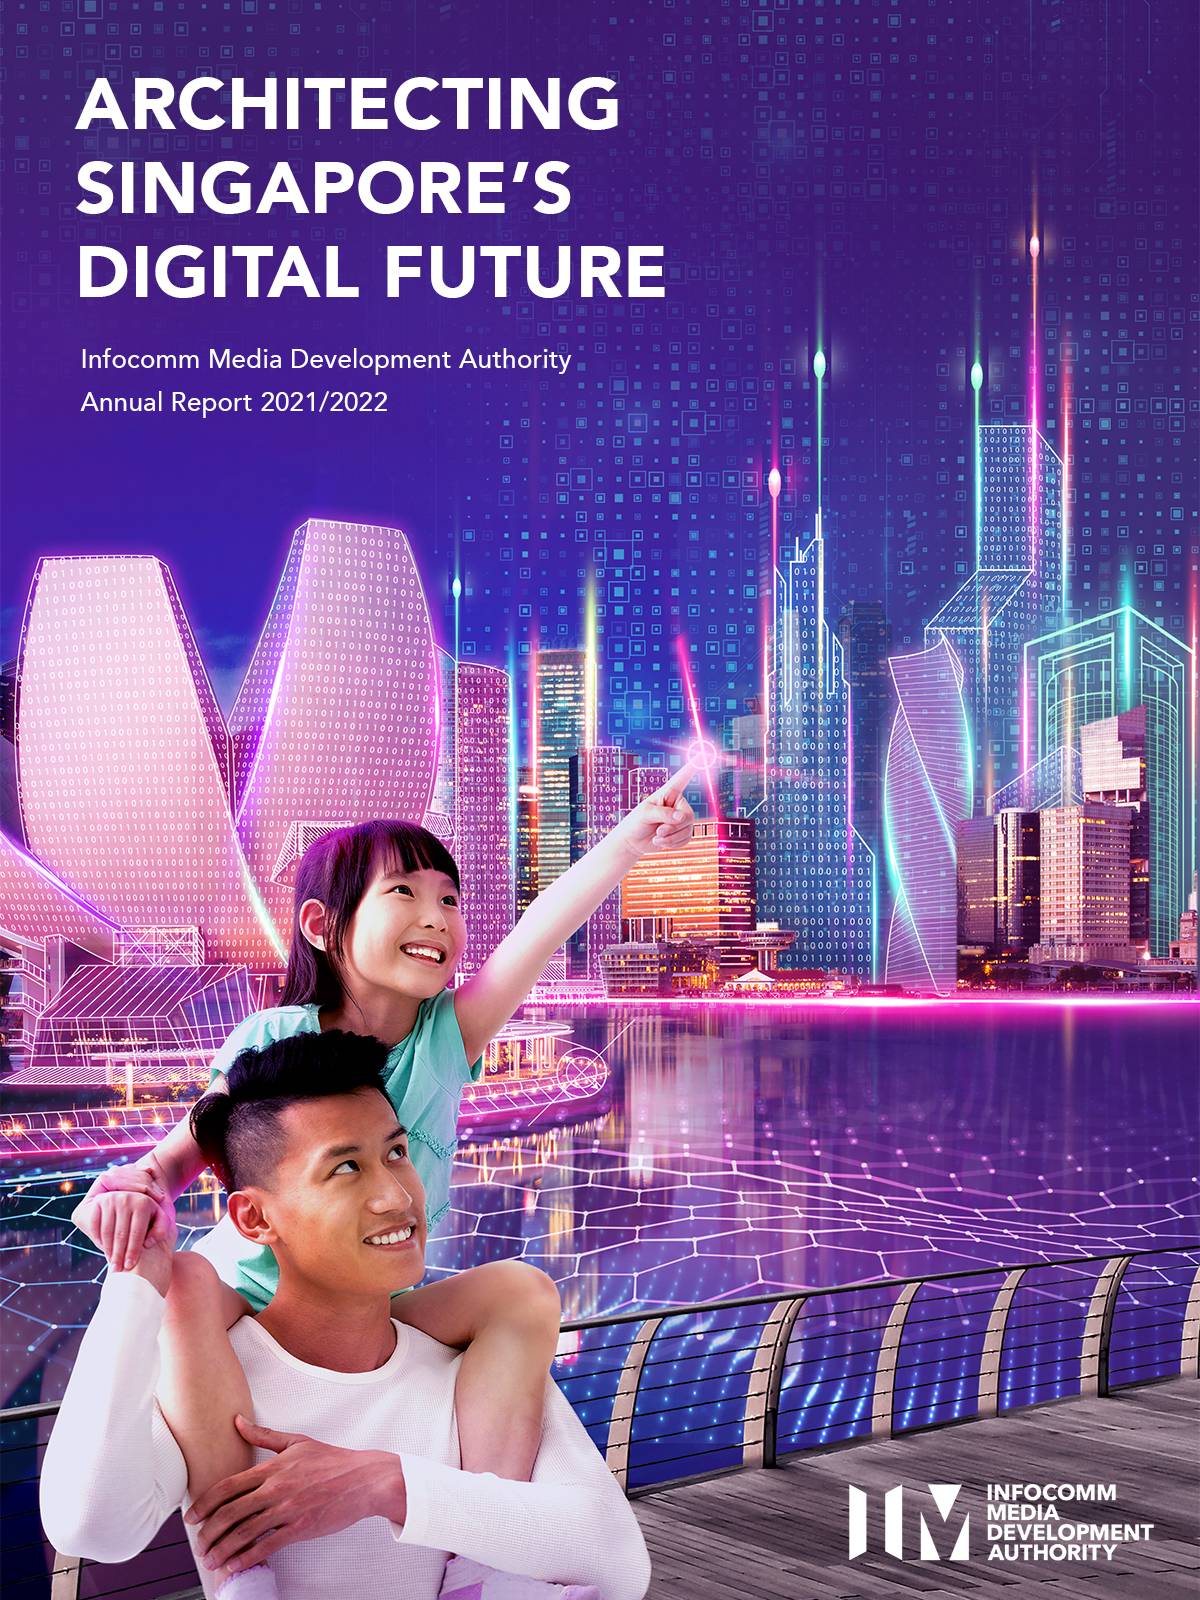 The front cover of IMDA's Annual Report 2021/2022 shows a boy piggybacking a little girl against a backdrop of Singapore's urban landscape